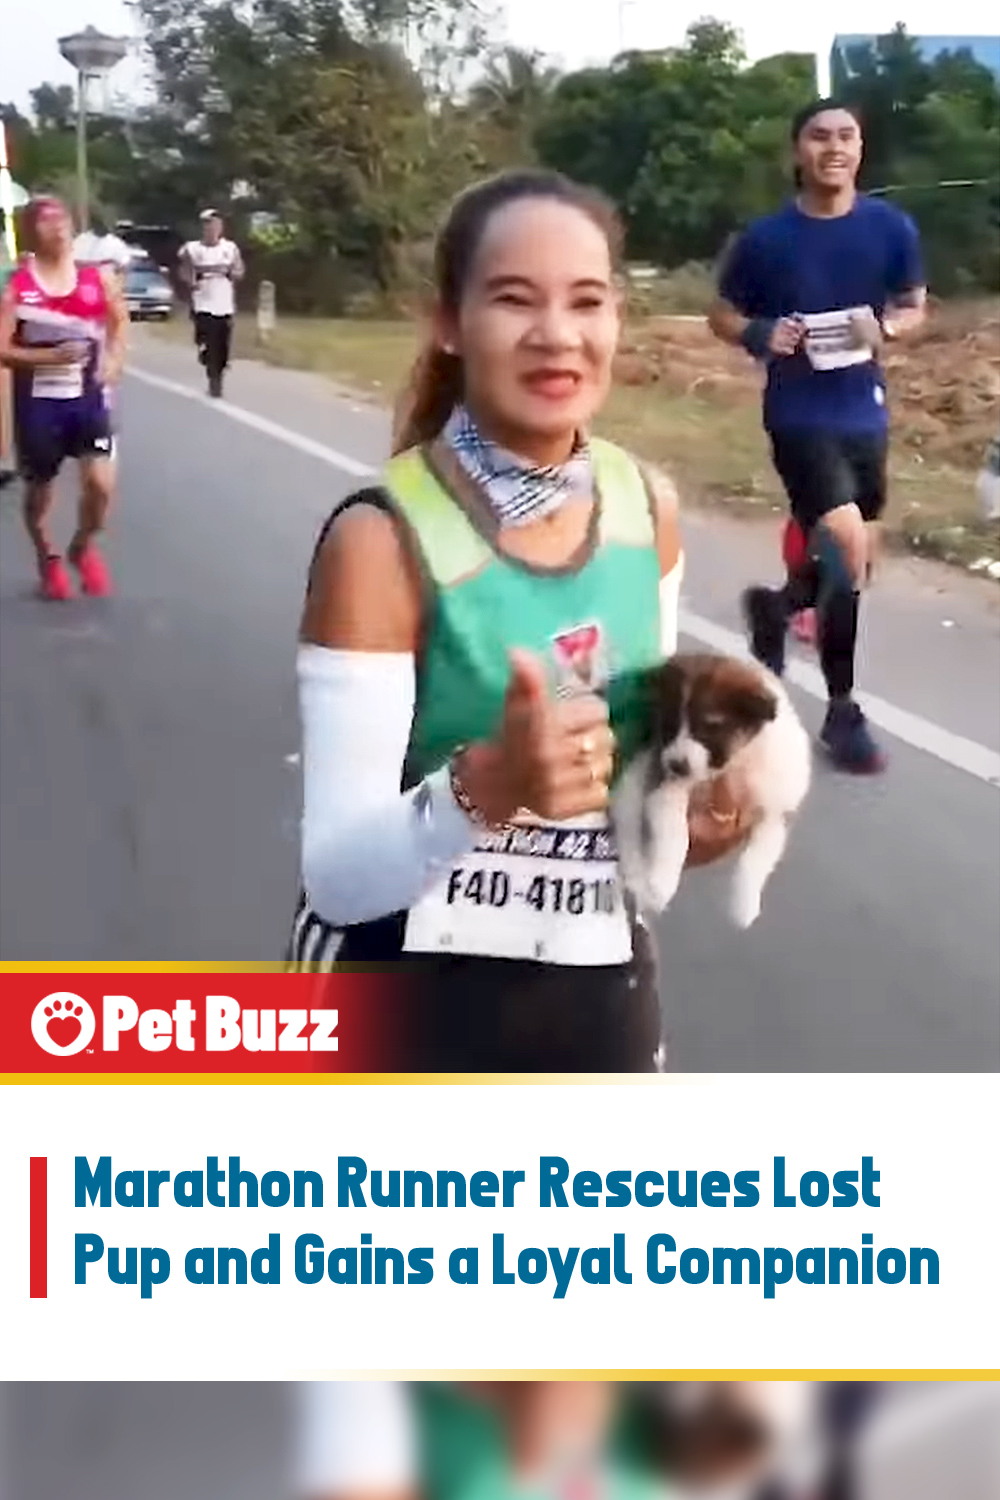 Marathon Runner Rescues Lost Pup and Gains a Loyal Companion